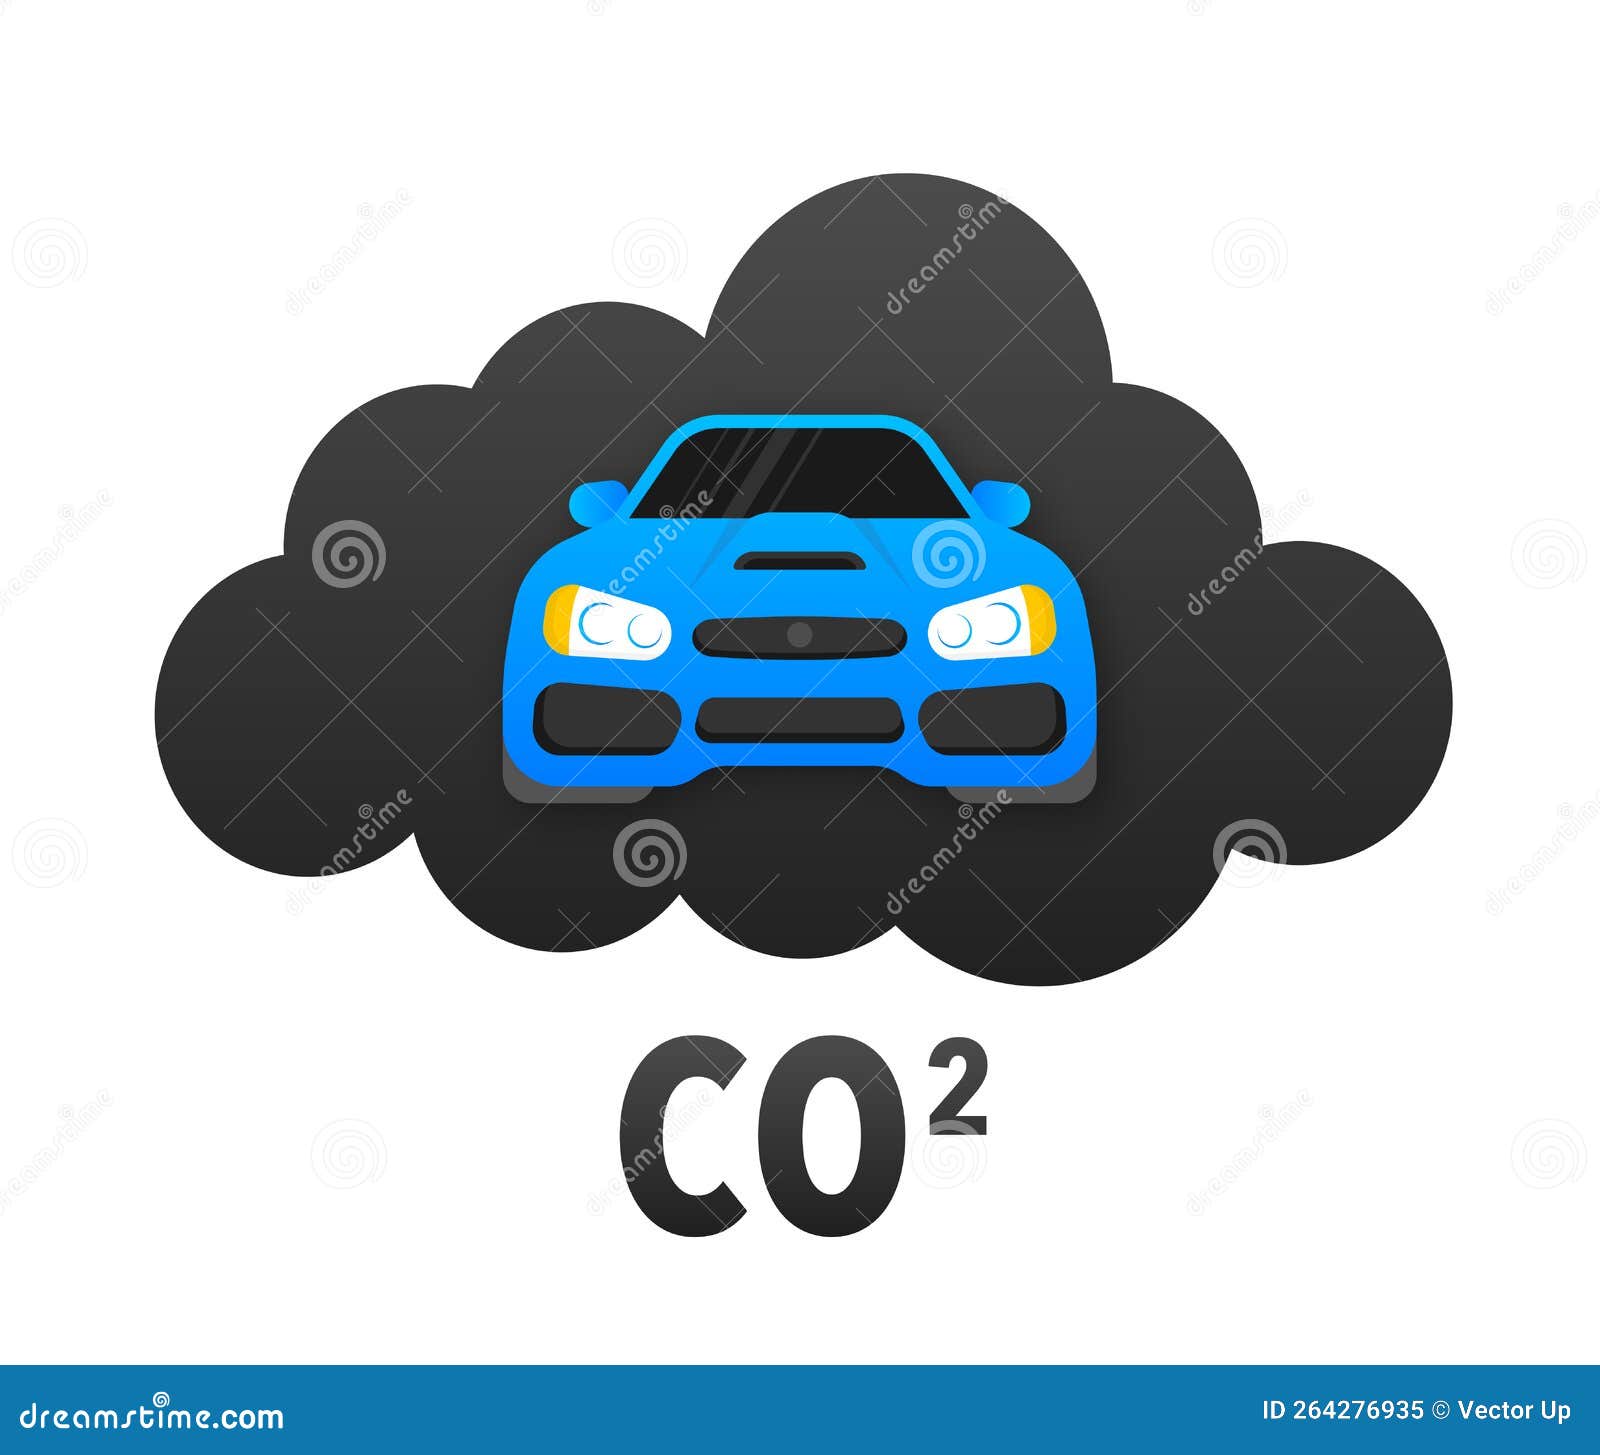 Co2 Emissions Icon. Carbon Dioxide. Car CO2 Cloud. Stock Vector ...